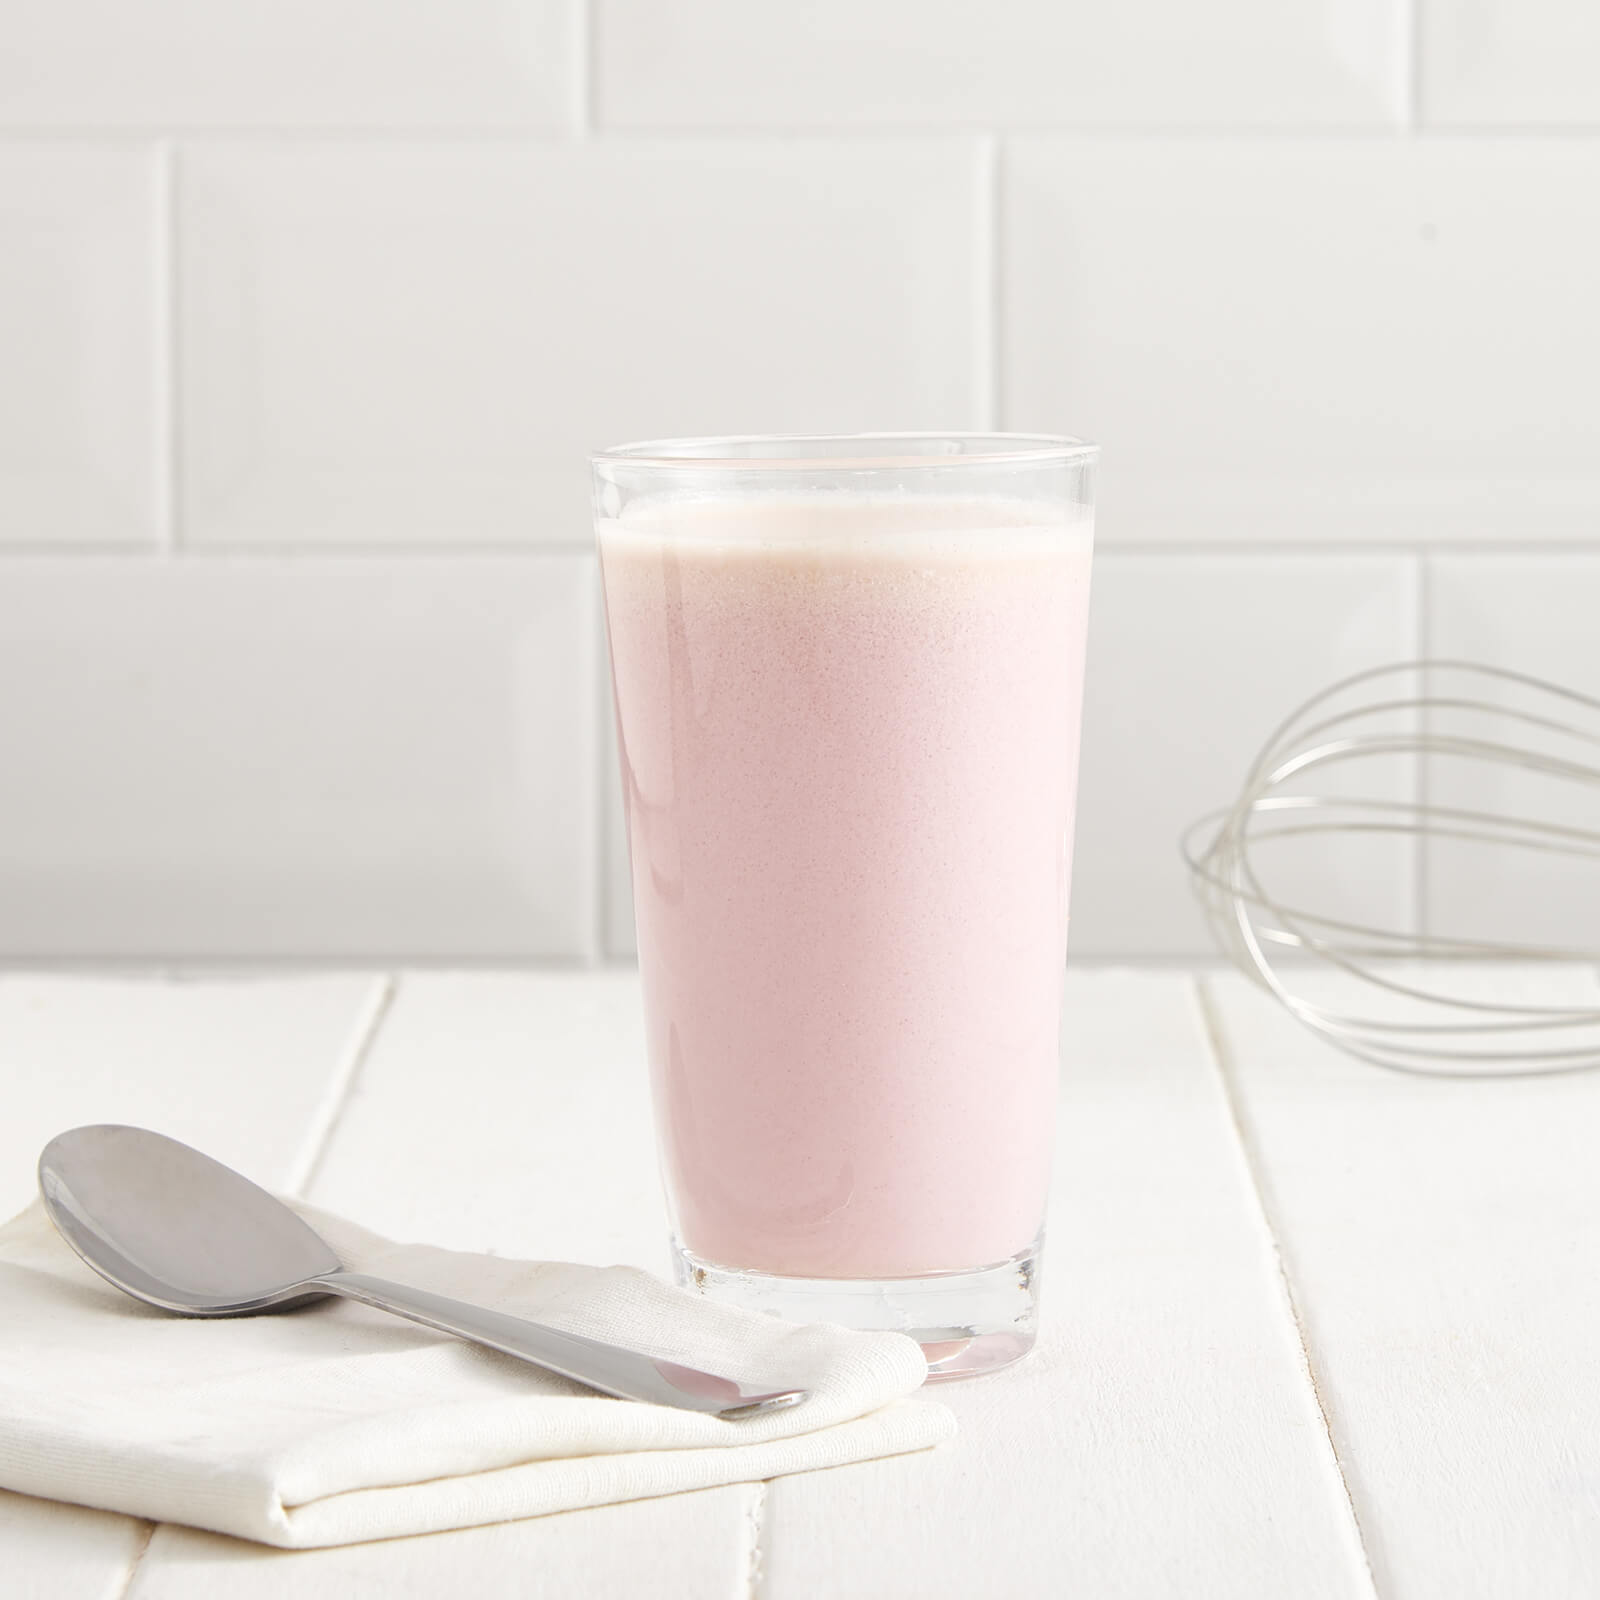 Exante Diet Meal Replacement Strawberry Shake